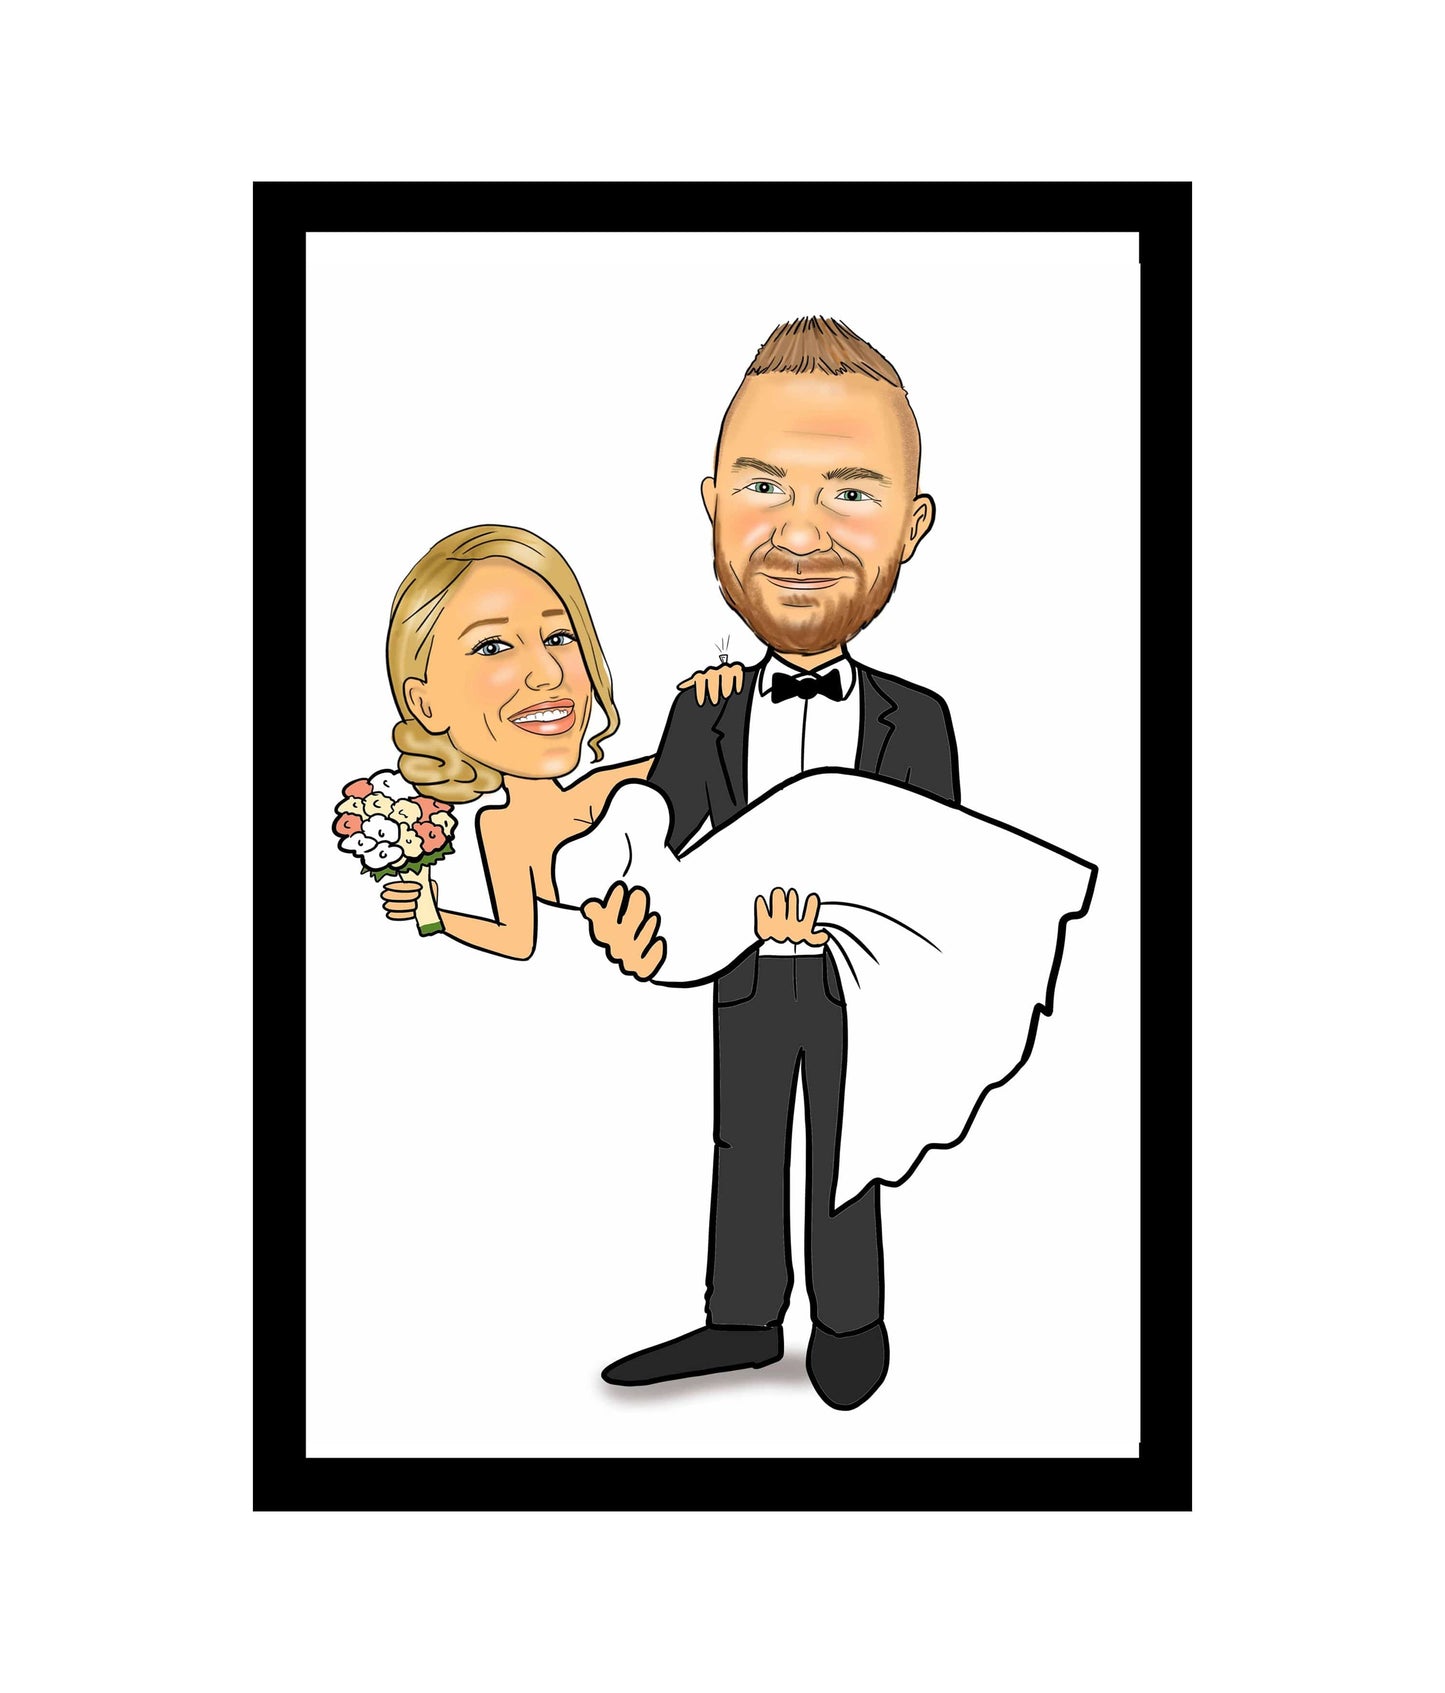 Wedding Caricature - carrying pose